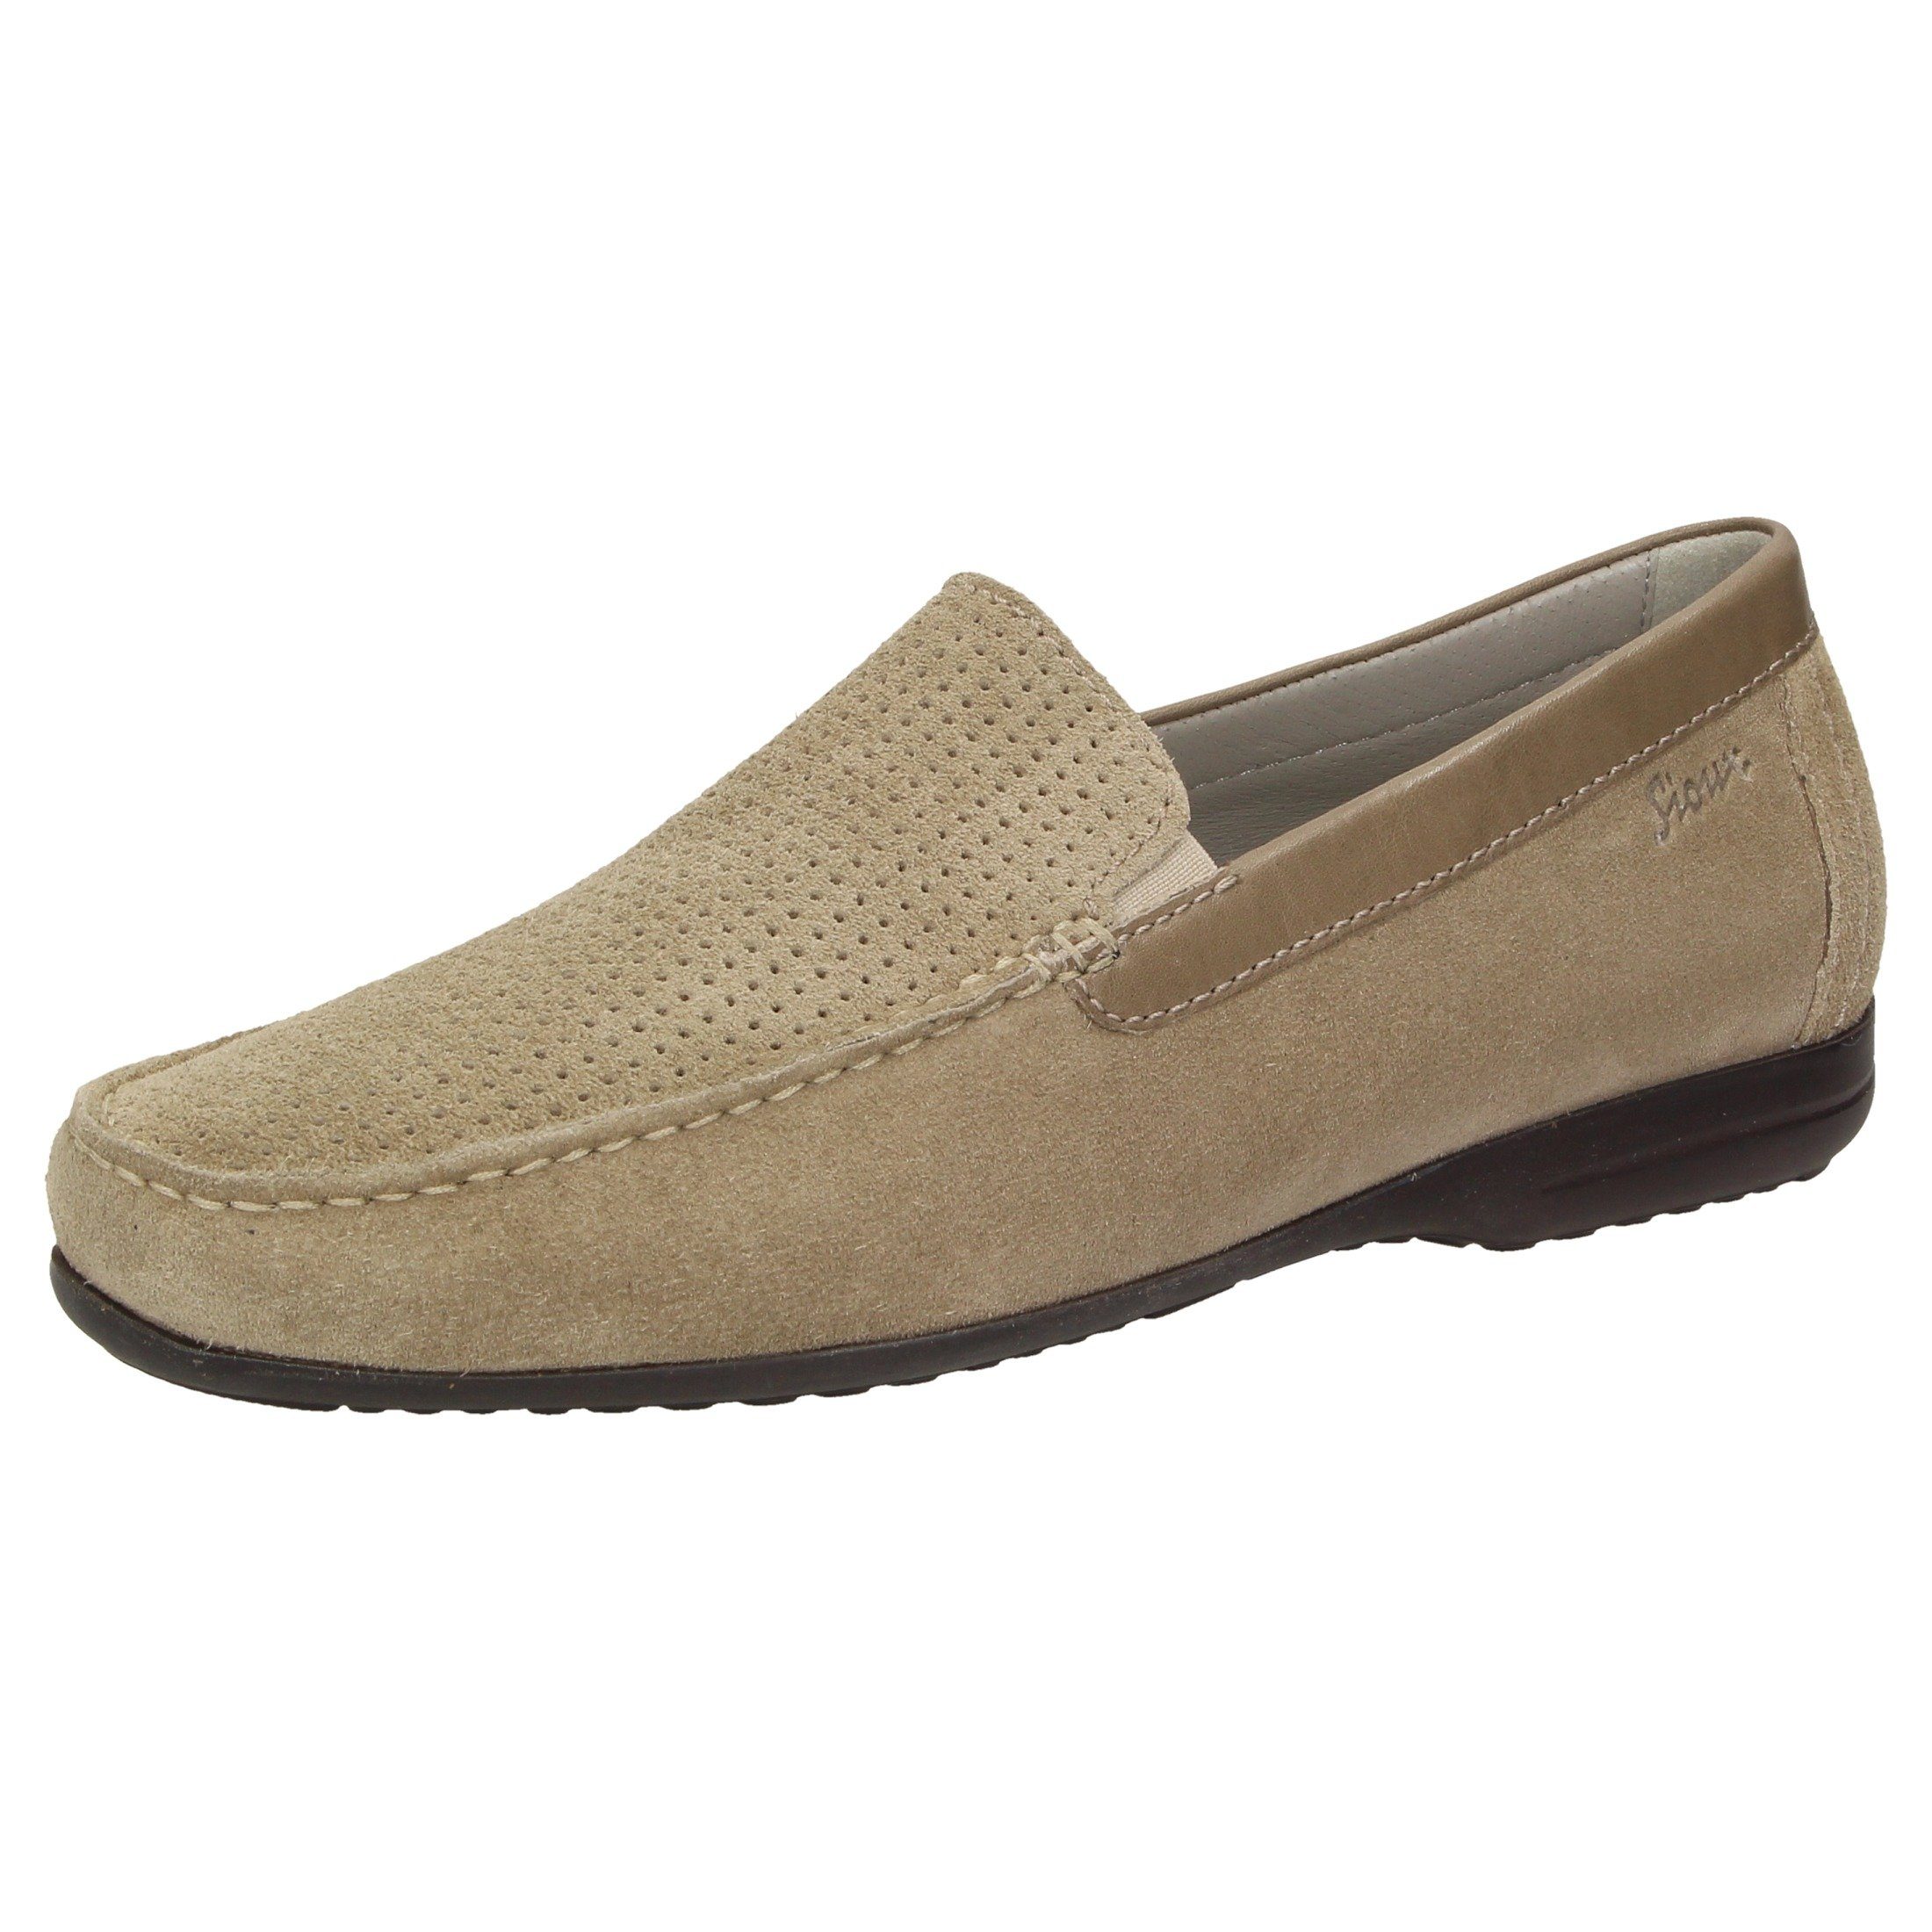 Otto - Sioux NU 15% KORTING: SIOUX Slippers Gifford-XL